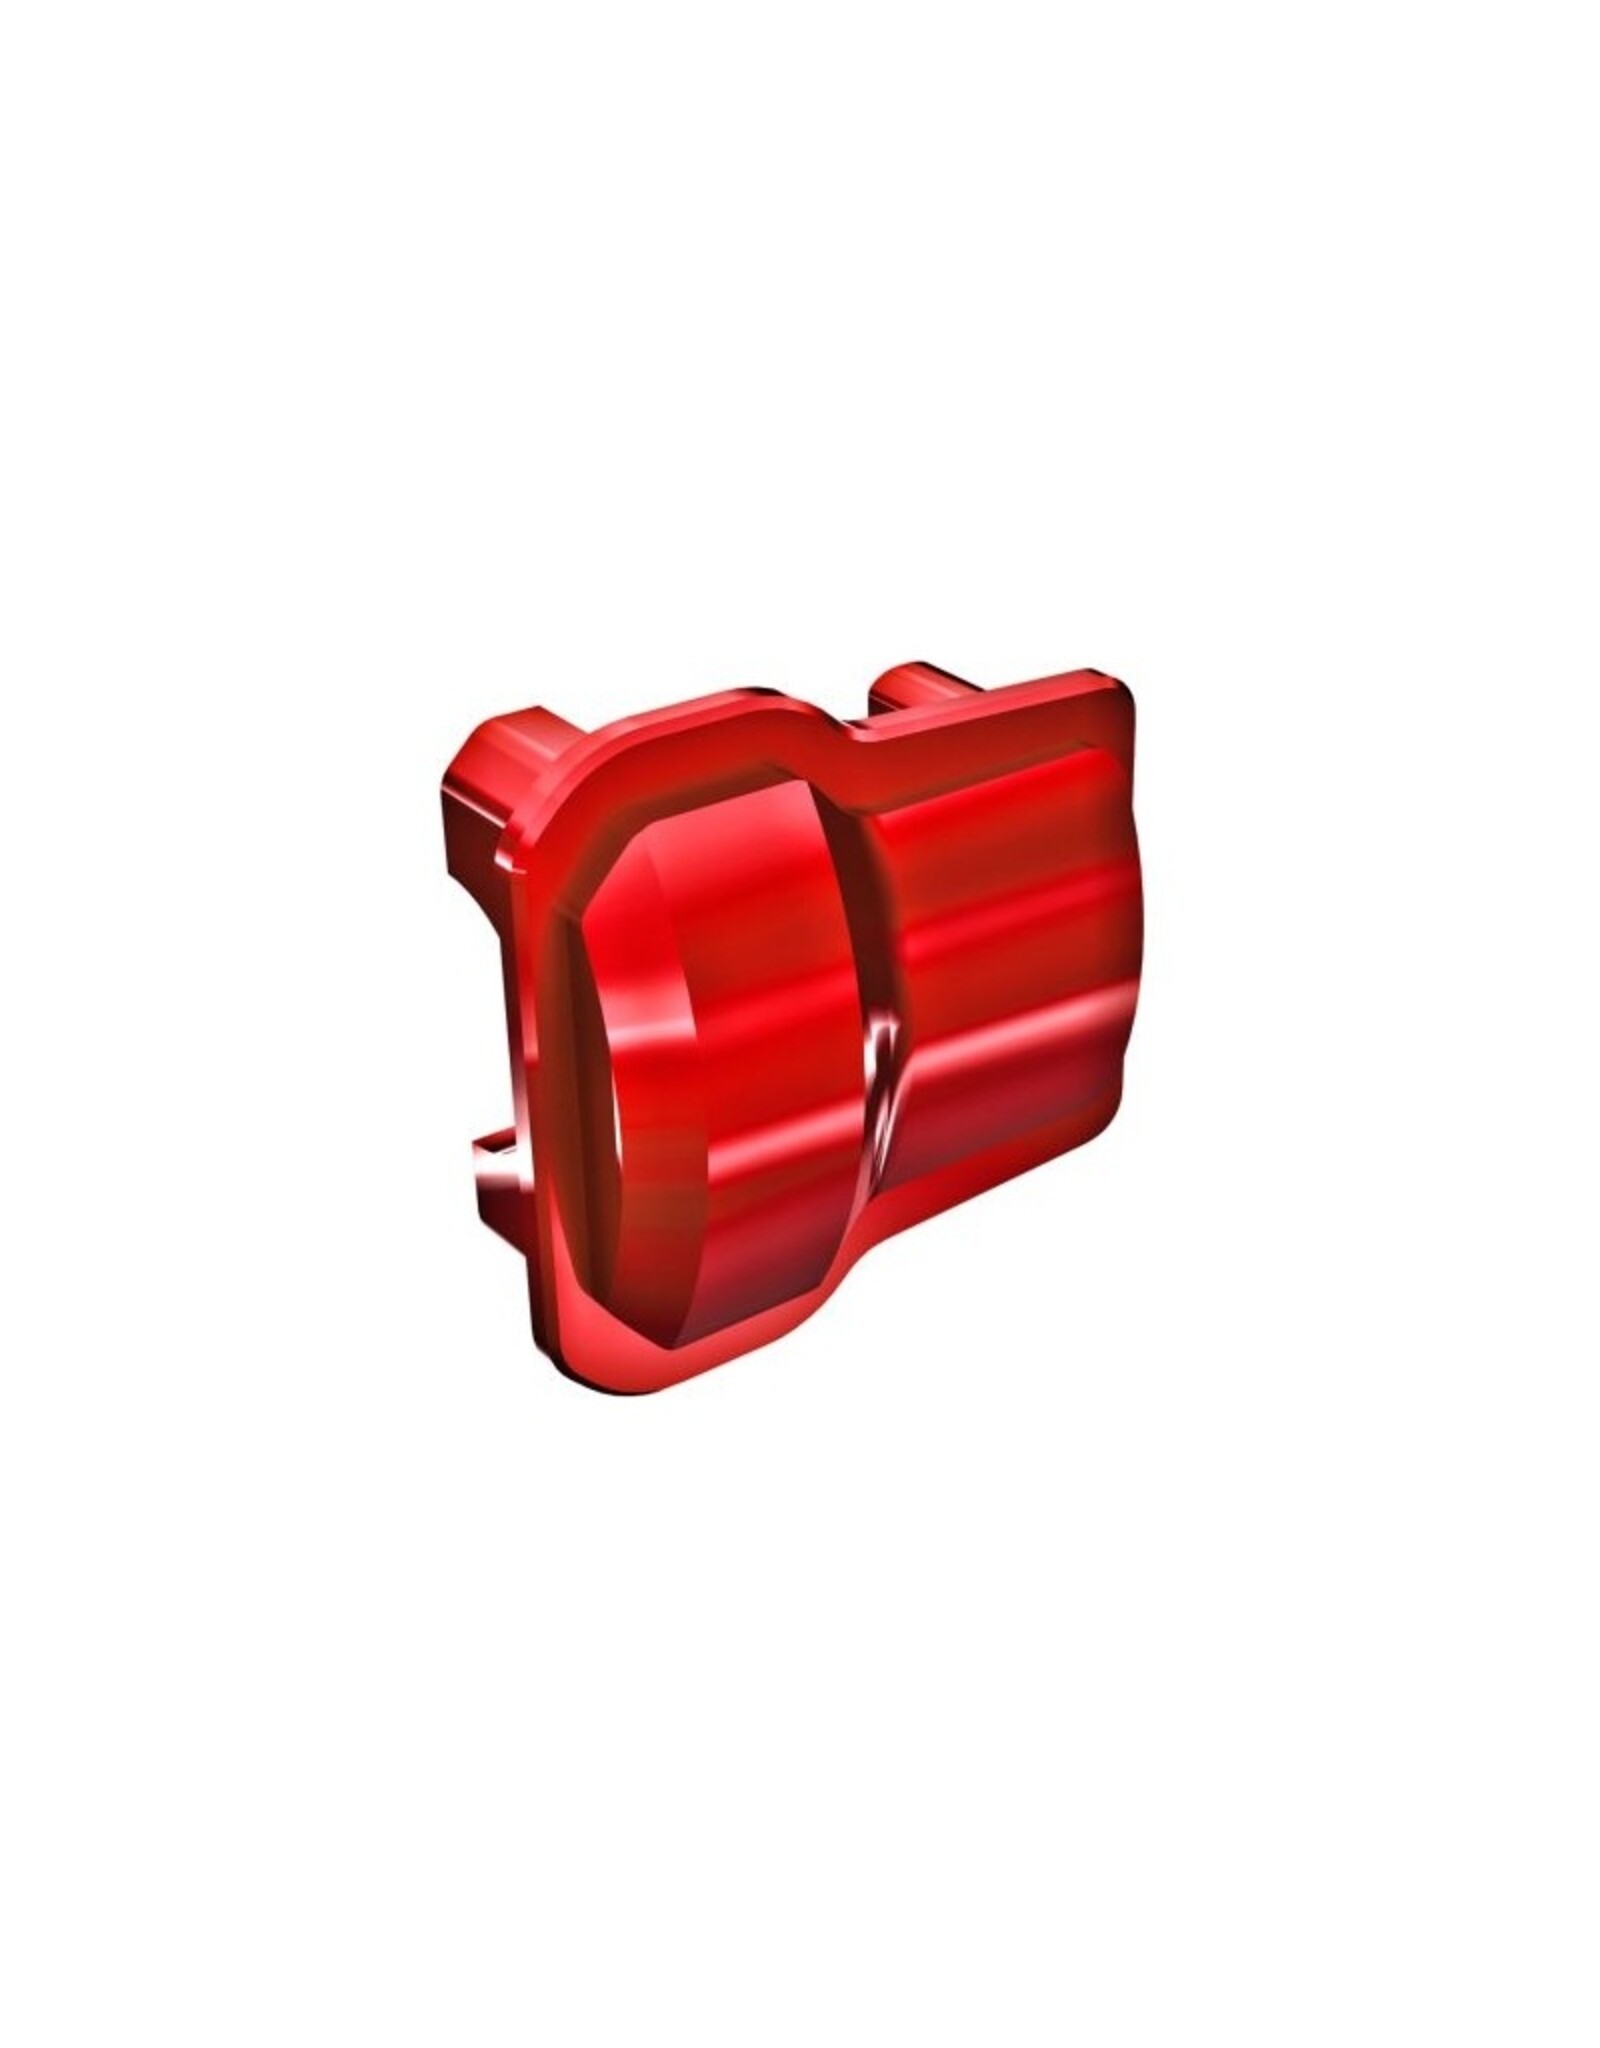 Traxxas TRA9787-RED  AXLE COVER RED